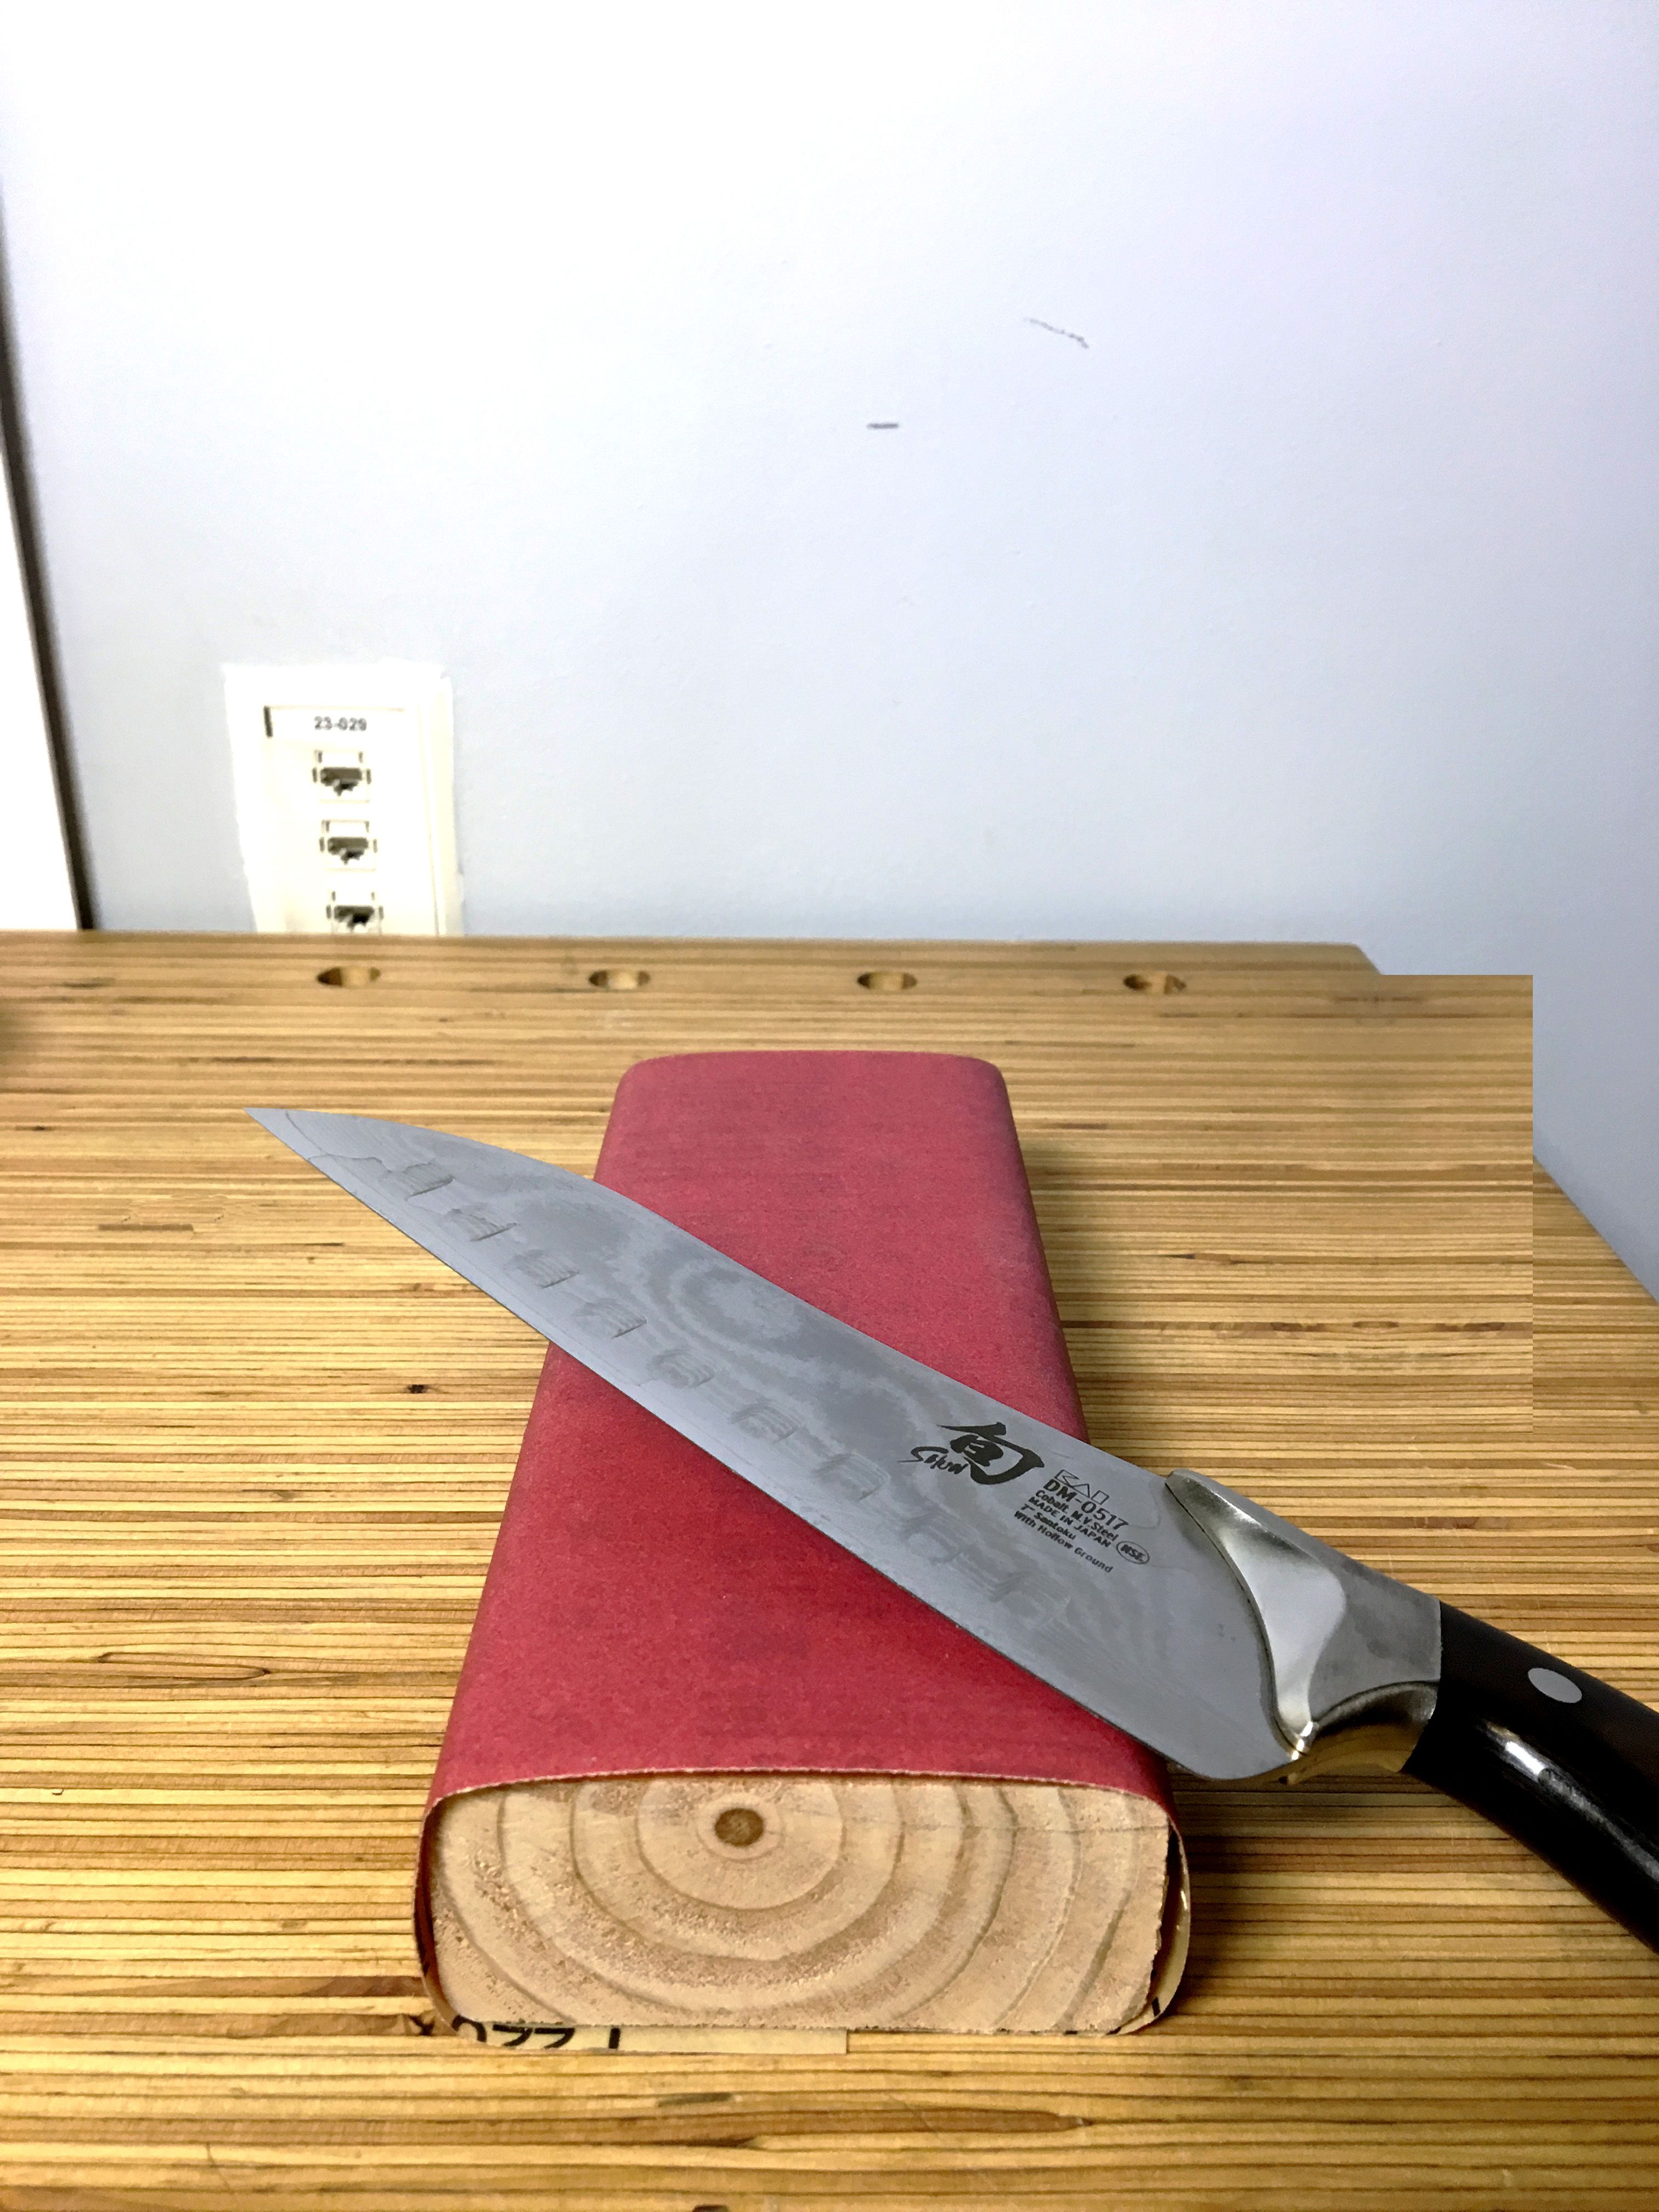 How To Sharpen A Knife With Sandpaper 